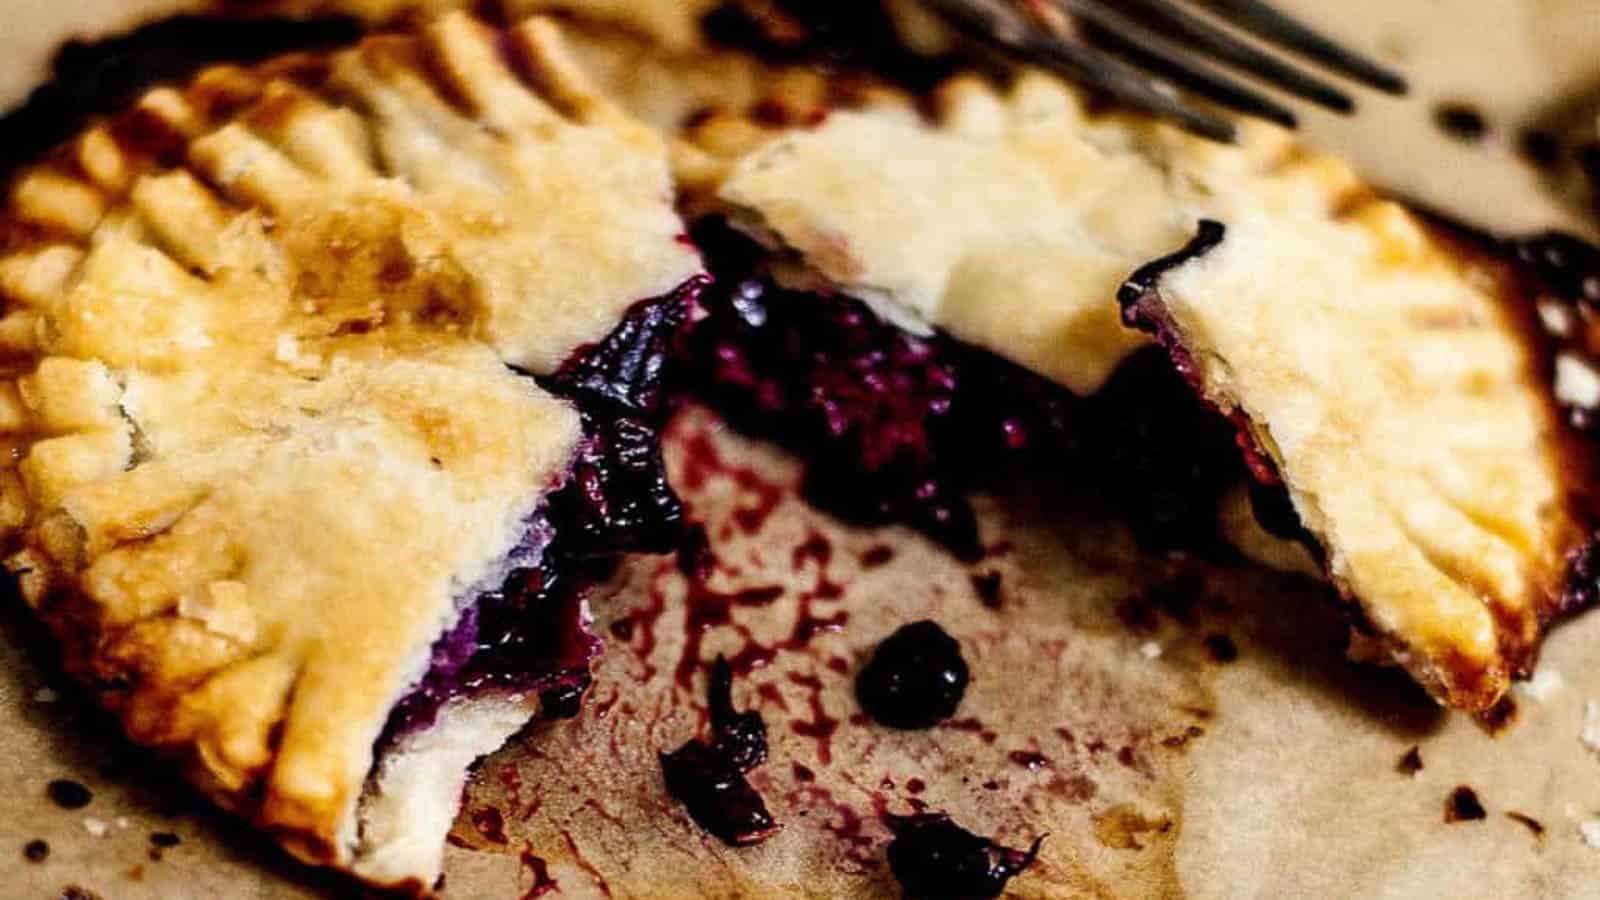 <p>Triple Berry Hand Pies are the perfect way to put an abundant berry harvest to good use. Flaky, buttery pastry crusts are filled with juicy, sweet berries bursting with flavor.<br><strong>Get the Recipe: </strong><a href="https://allwaysdelicious.com/triple-berry-hand-pies/?utm_source=msn&utm_medium=page&utm_campaign=msn">Triple Berry Hand Pies</a></p>